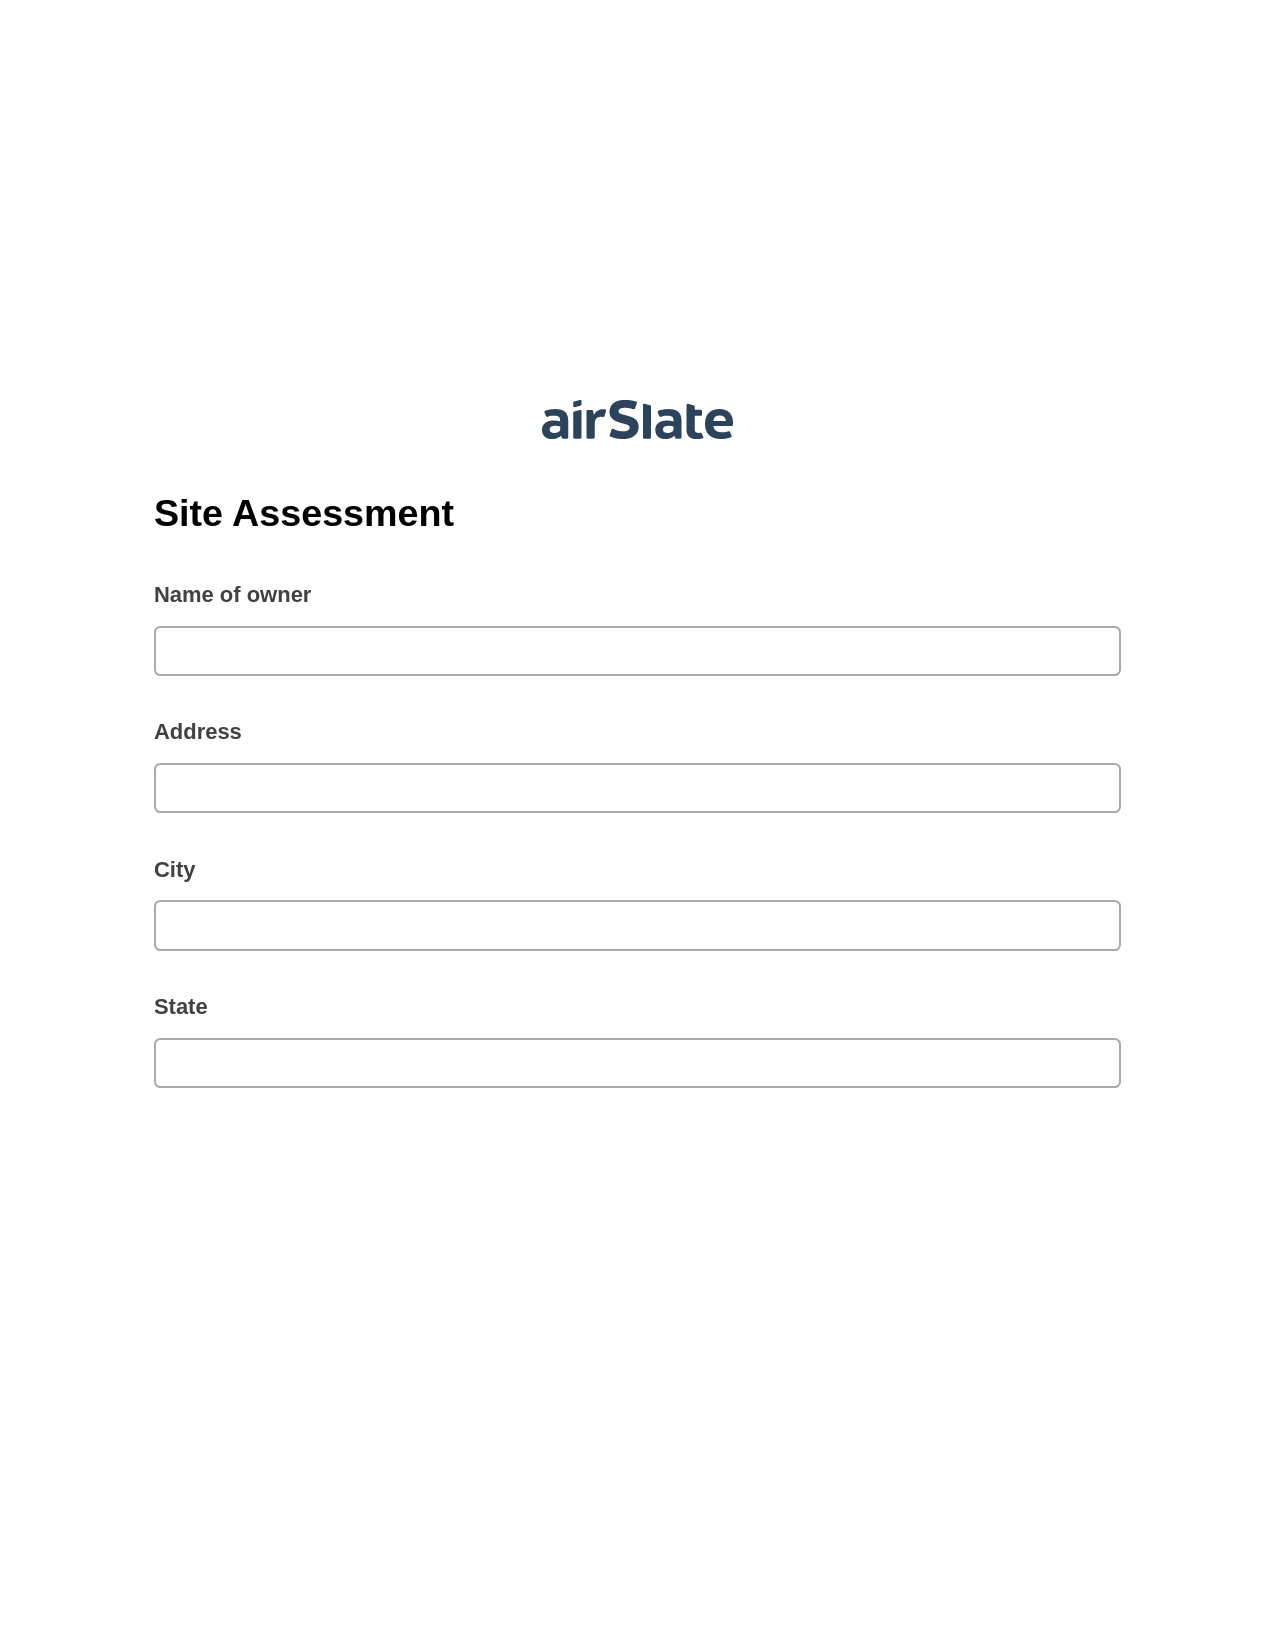 Site Assessment Pre-fill from Salesforce Record Bot, Update Salesforce Record Bot, Dropbox Bot